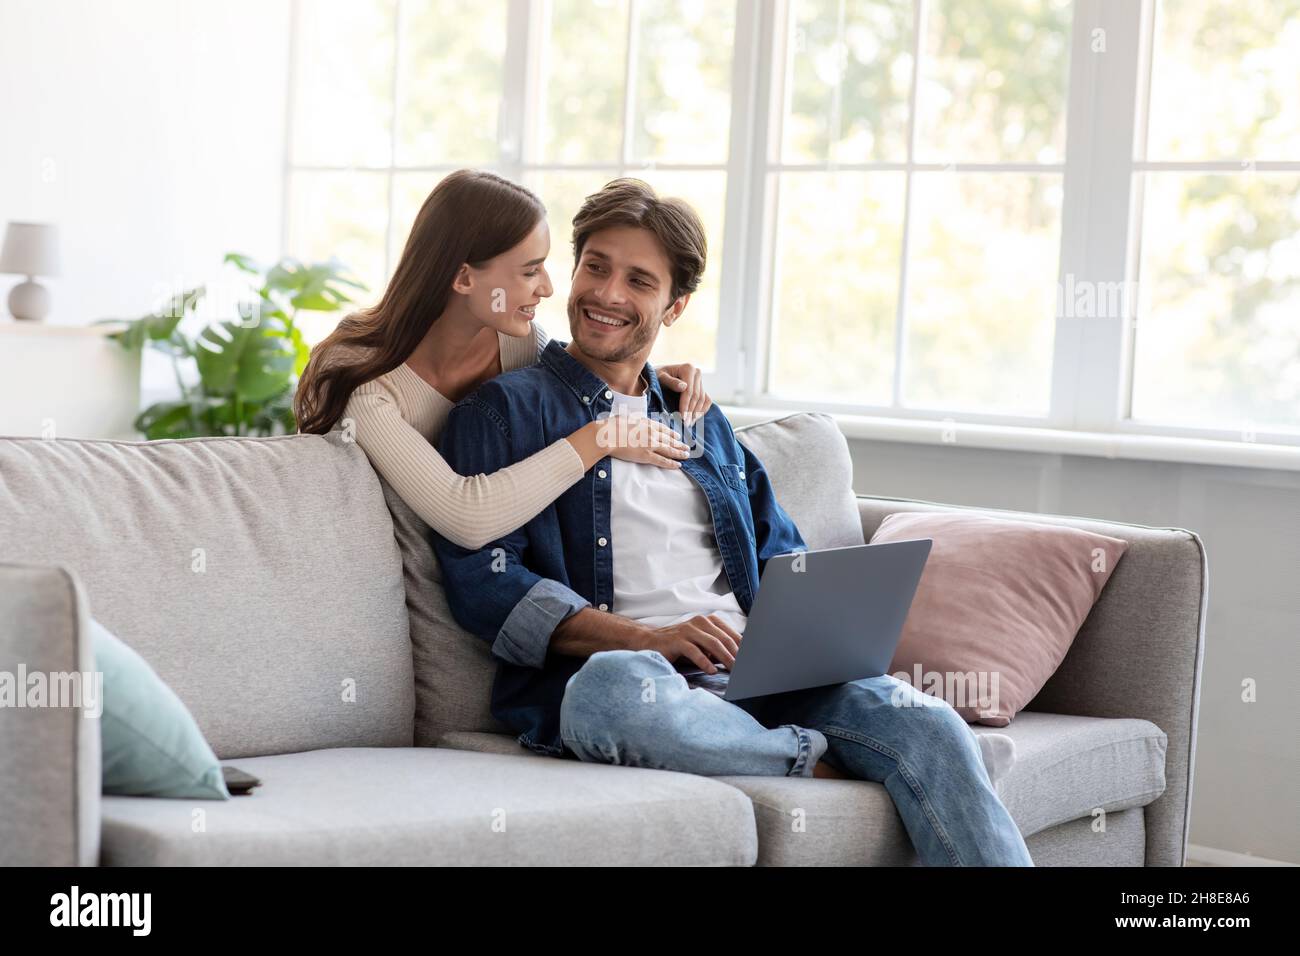 Smiling millennial european lady hugging guy, man work at home, sits on sofa in living room interior Stock Photo